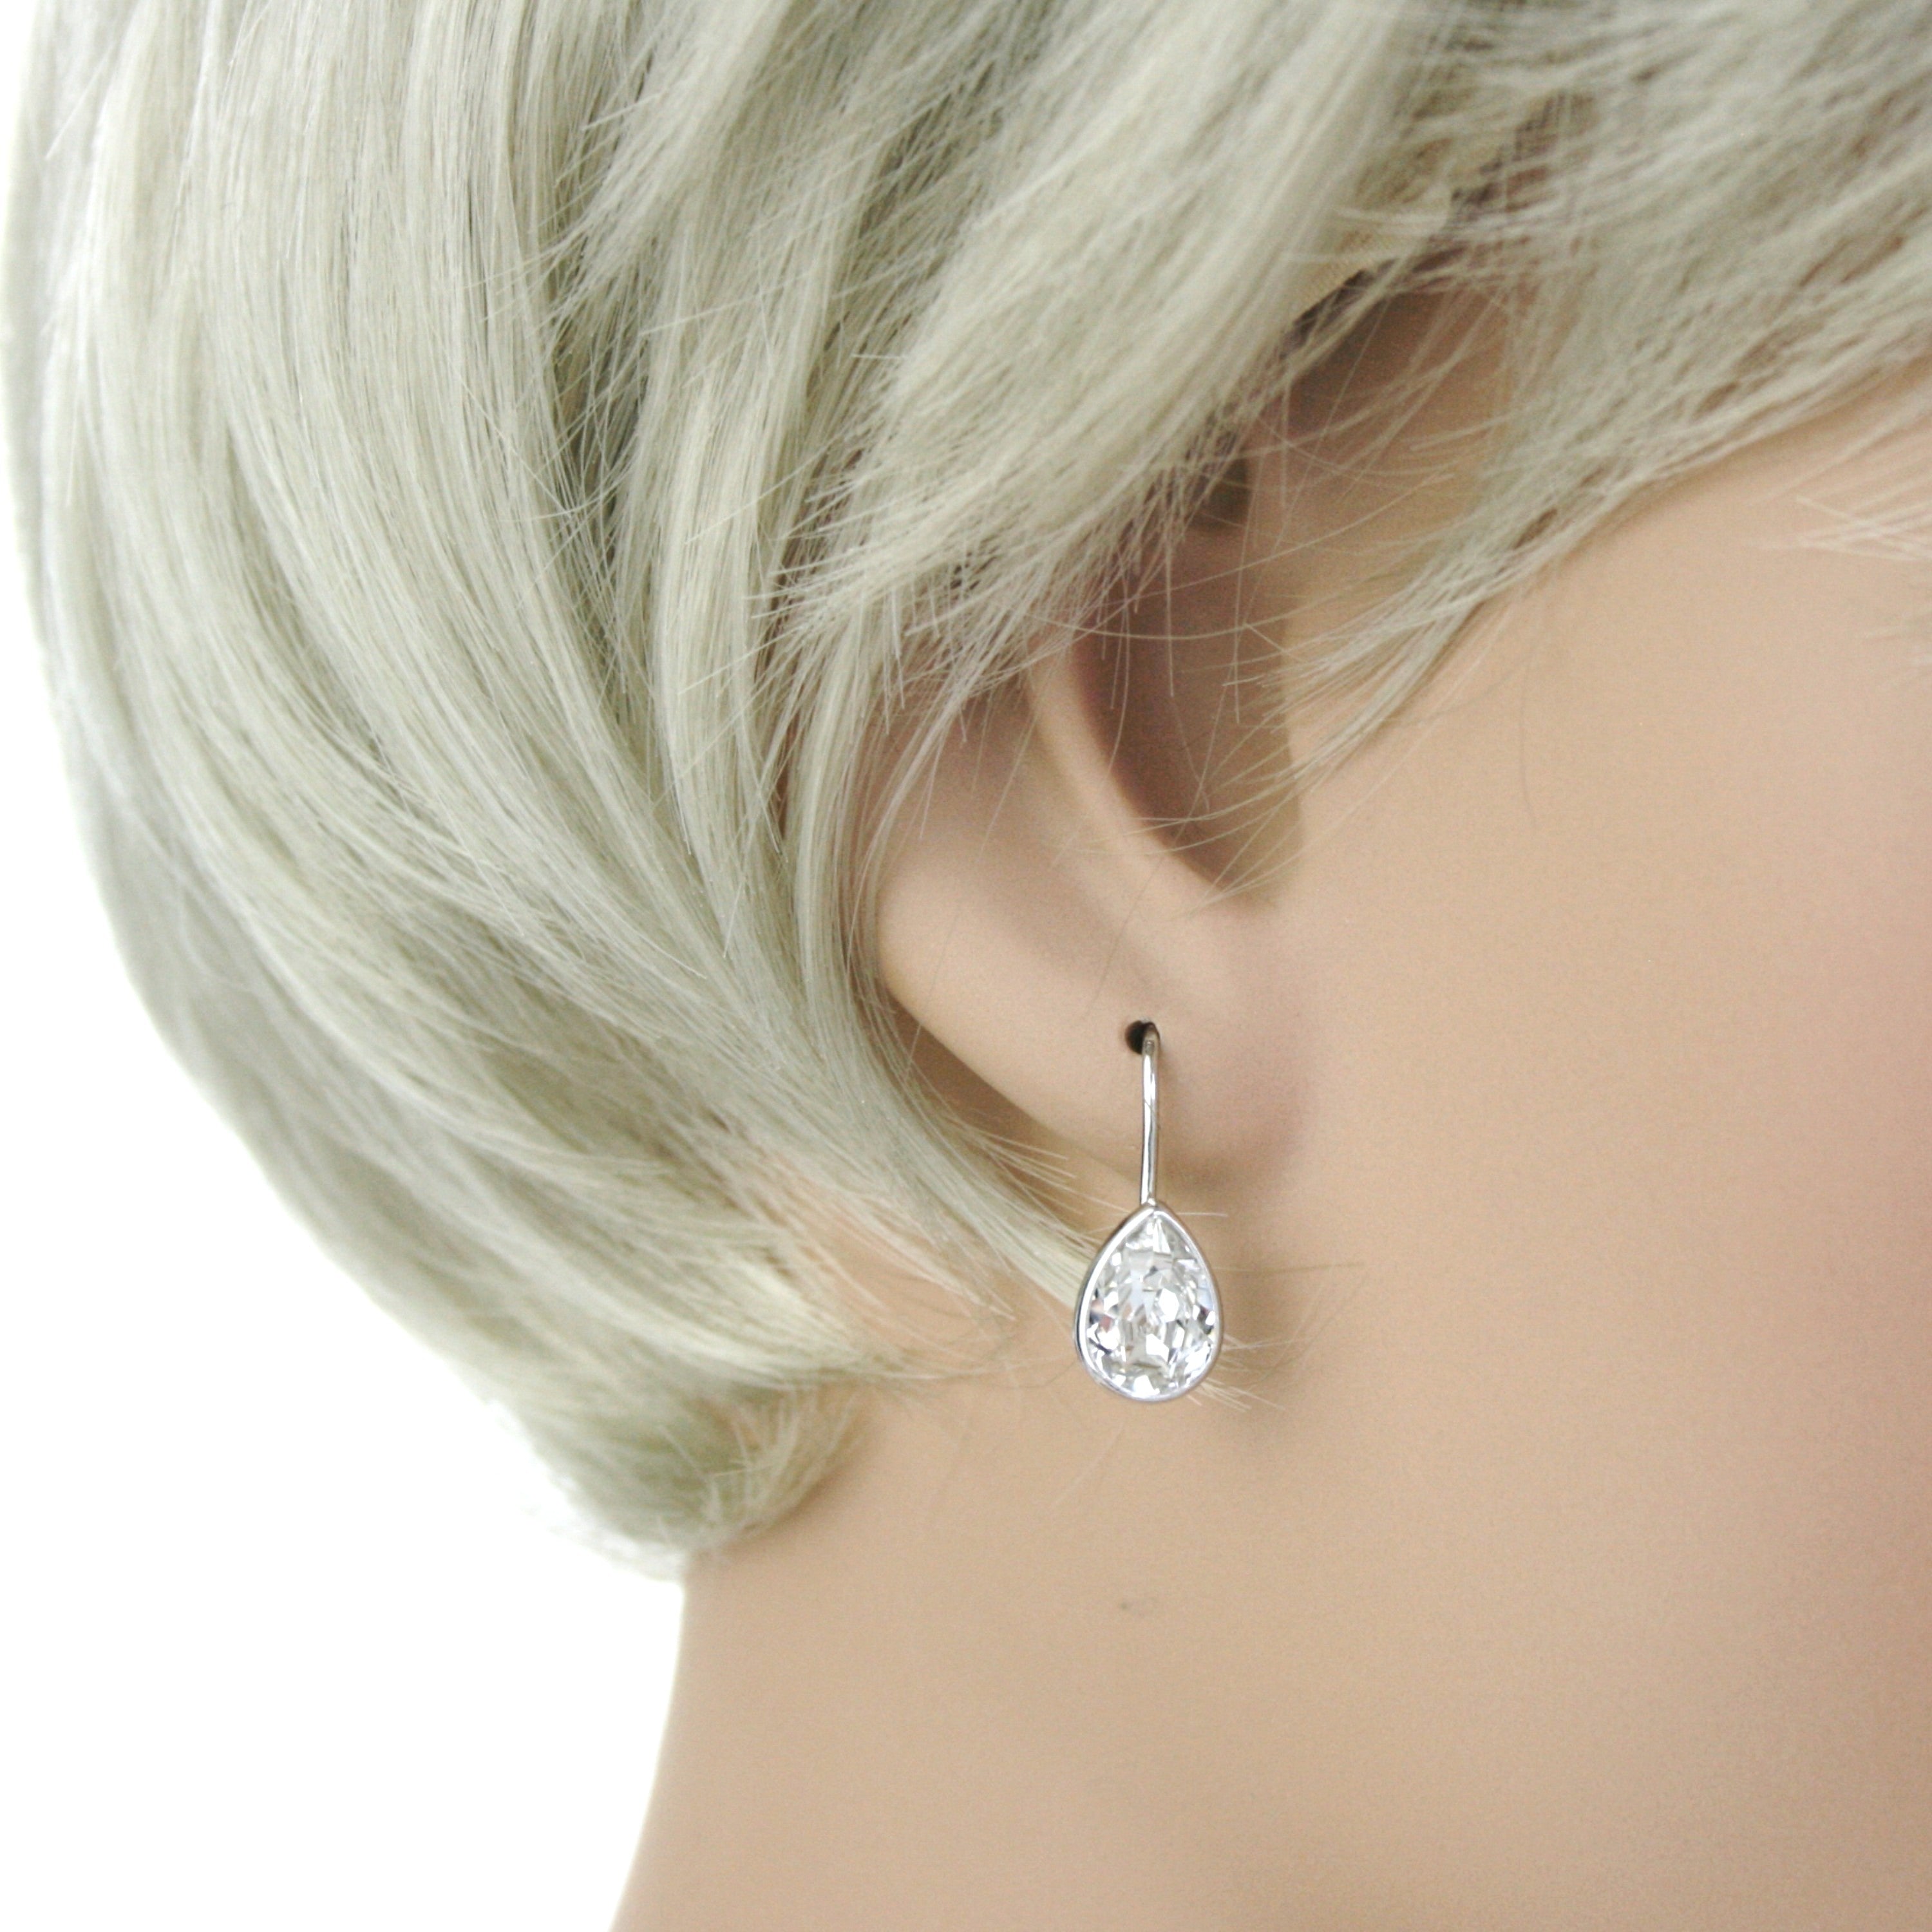 Sterling Silver Pear Earrings by Davvero with Crystals from Swarovski®